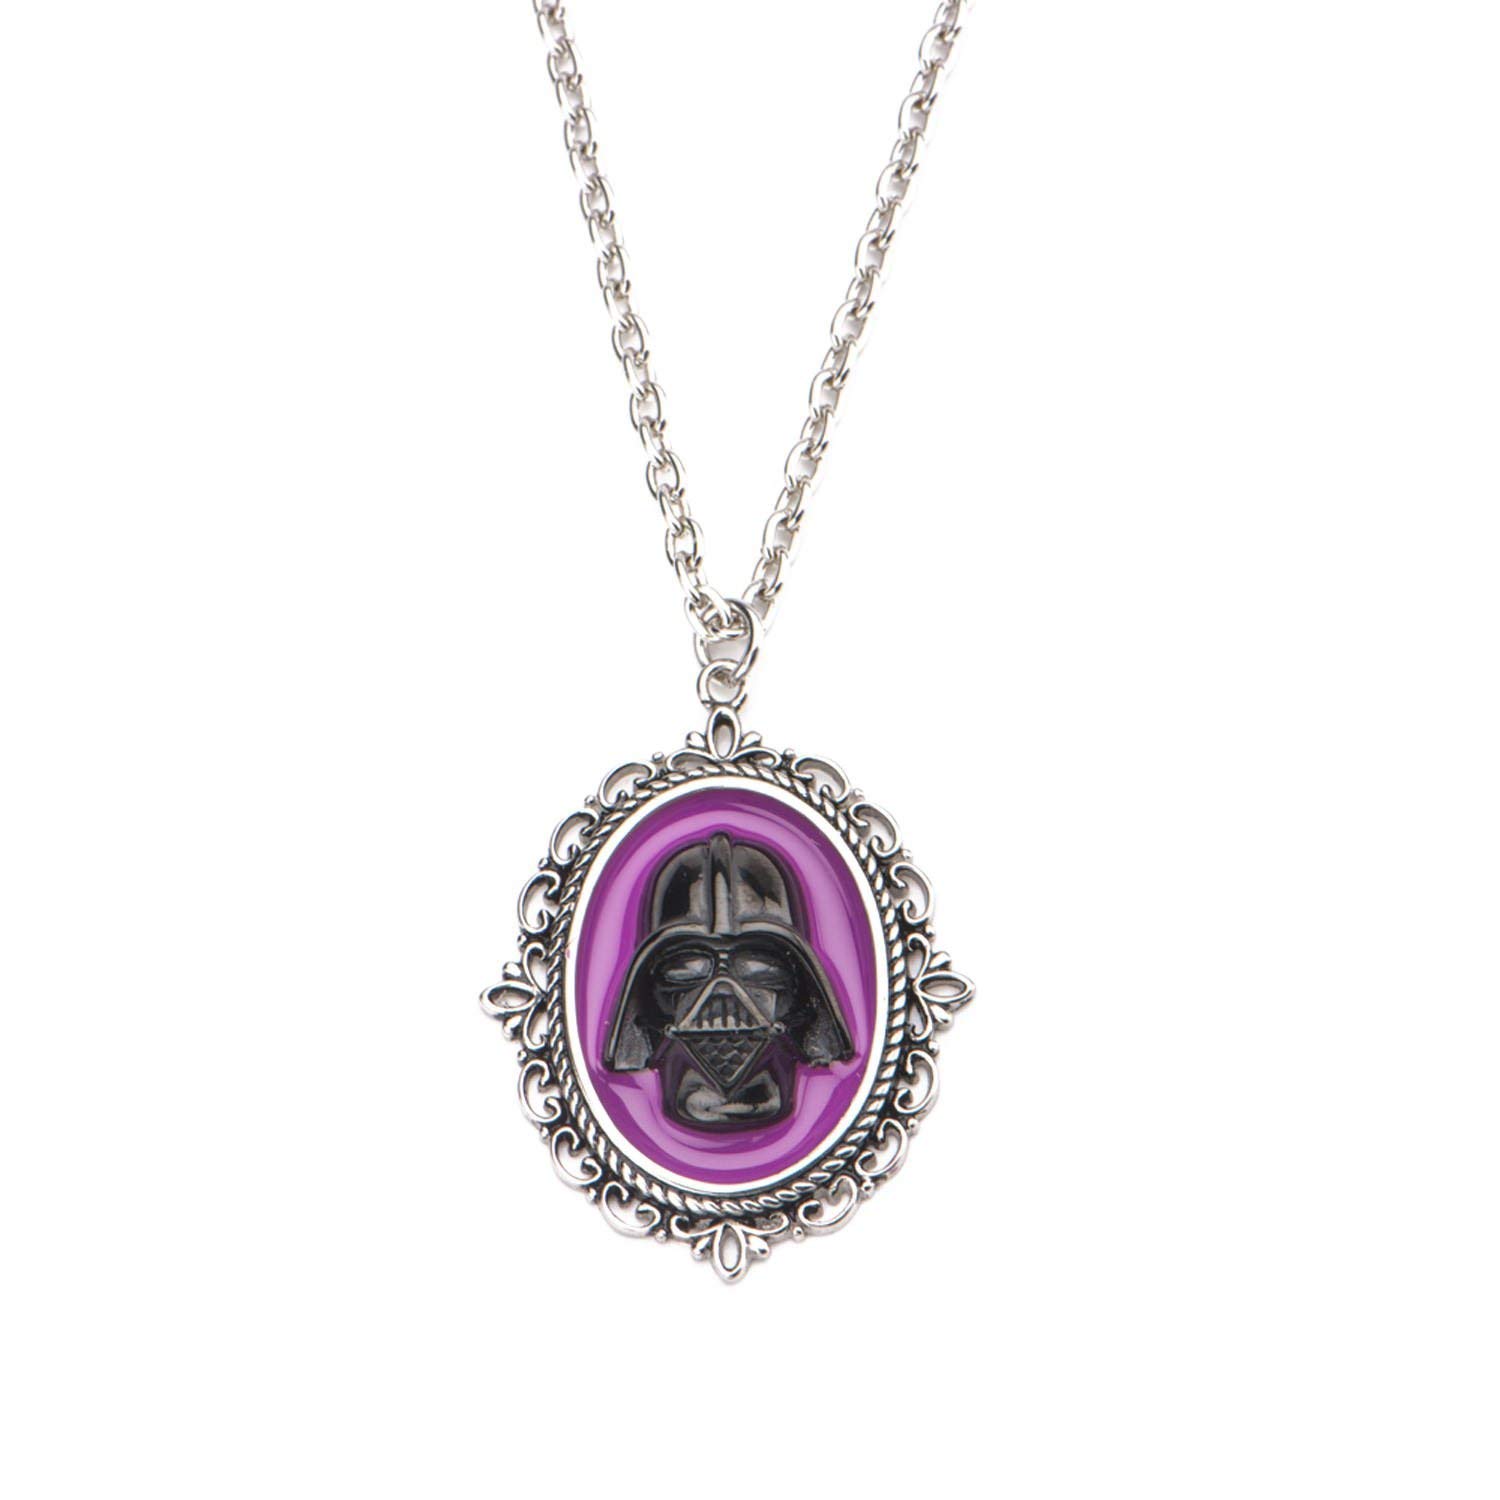 Body Vibe x Star Wars Darth Vader Pink Cameo Necklace on Amazon